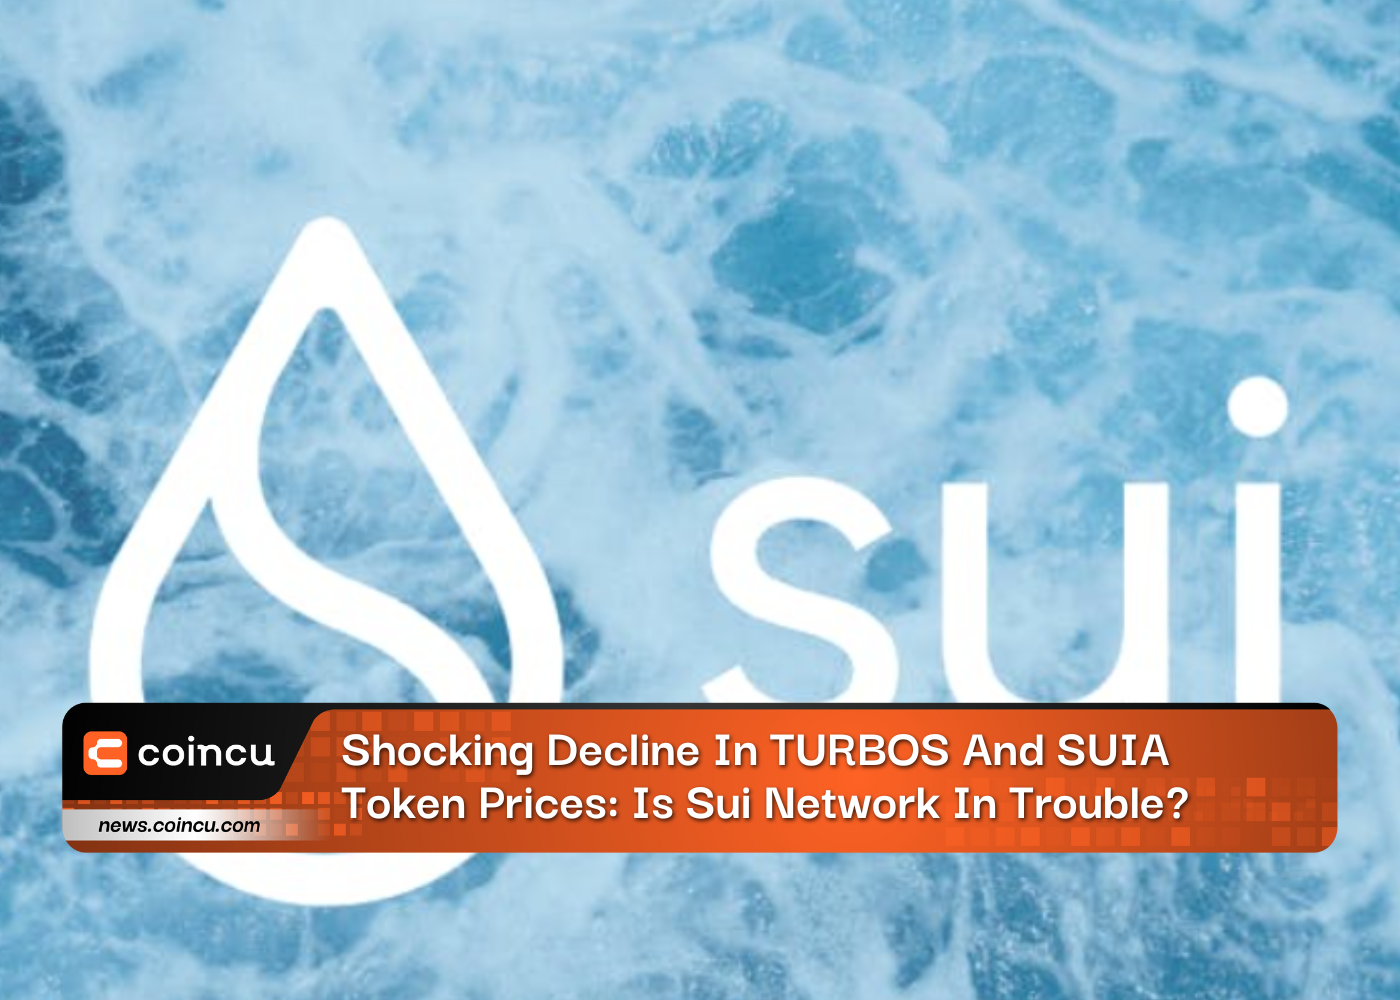 Shocking Decline In TURBOS And SUIA Token Prices: Is Sui Network In Trouble?